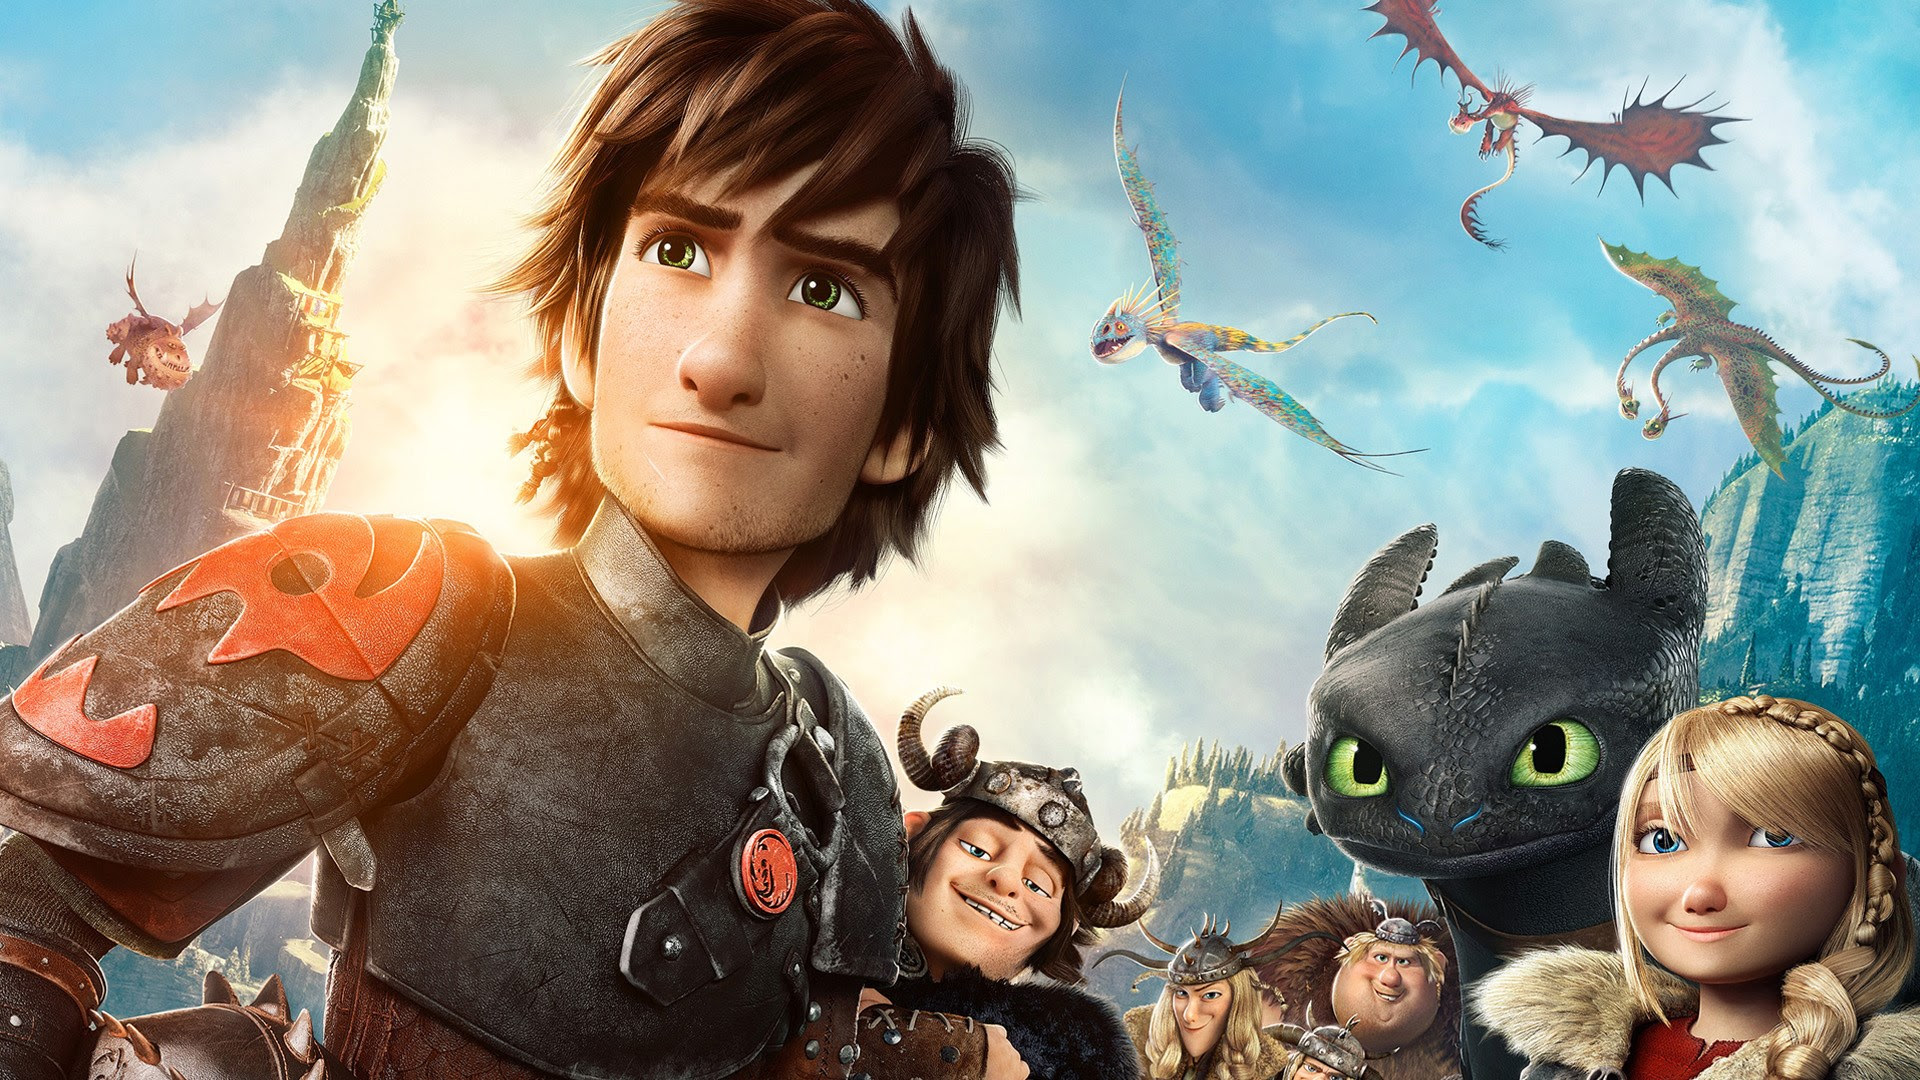 1920x1080 Free High Resolution Wallpaper How To Train Your Dragon 2